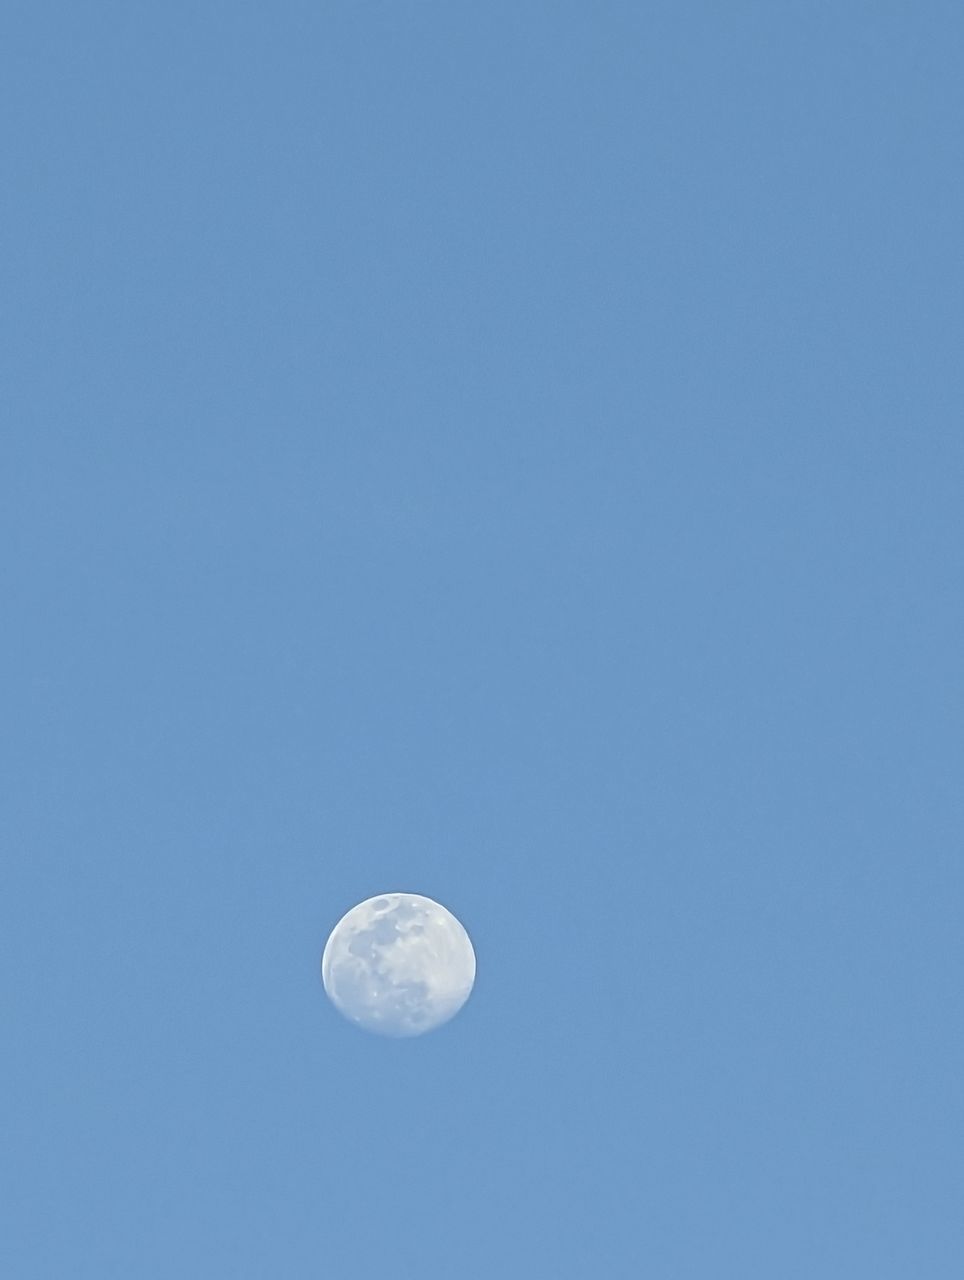 moon, sky, space, blue, astronomy, clear sky, copy space, no people, beauty in nature, low angle view, nature, tranquility, full moon, scenics - nature, planetary moon, night, tranquil scene, outdoors, astrology, idyllic, circle, moon surface, geometric shape, discovery, astronomical object, space exploration, cloud, exploration